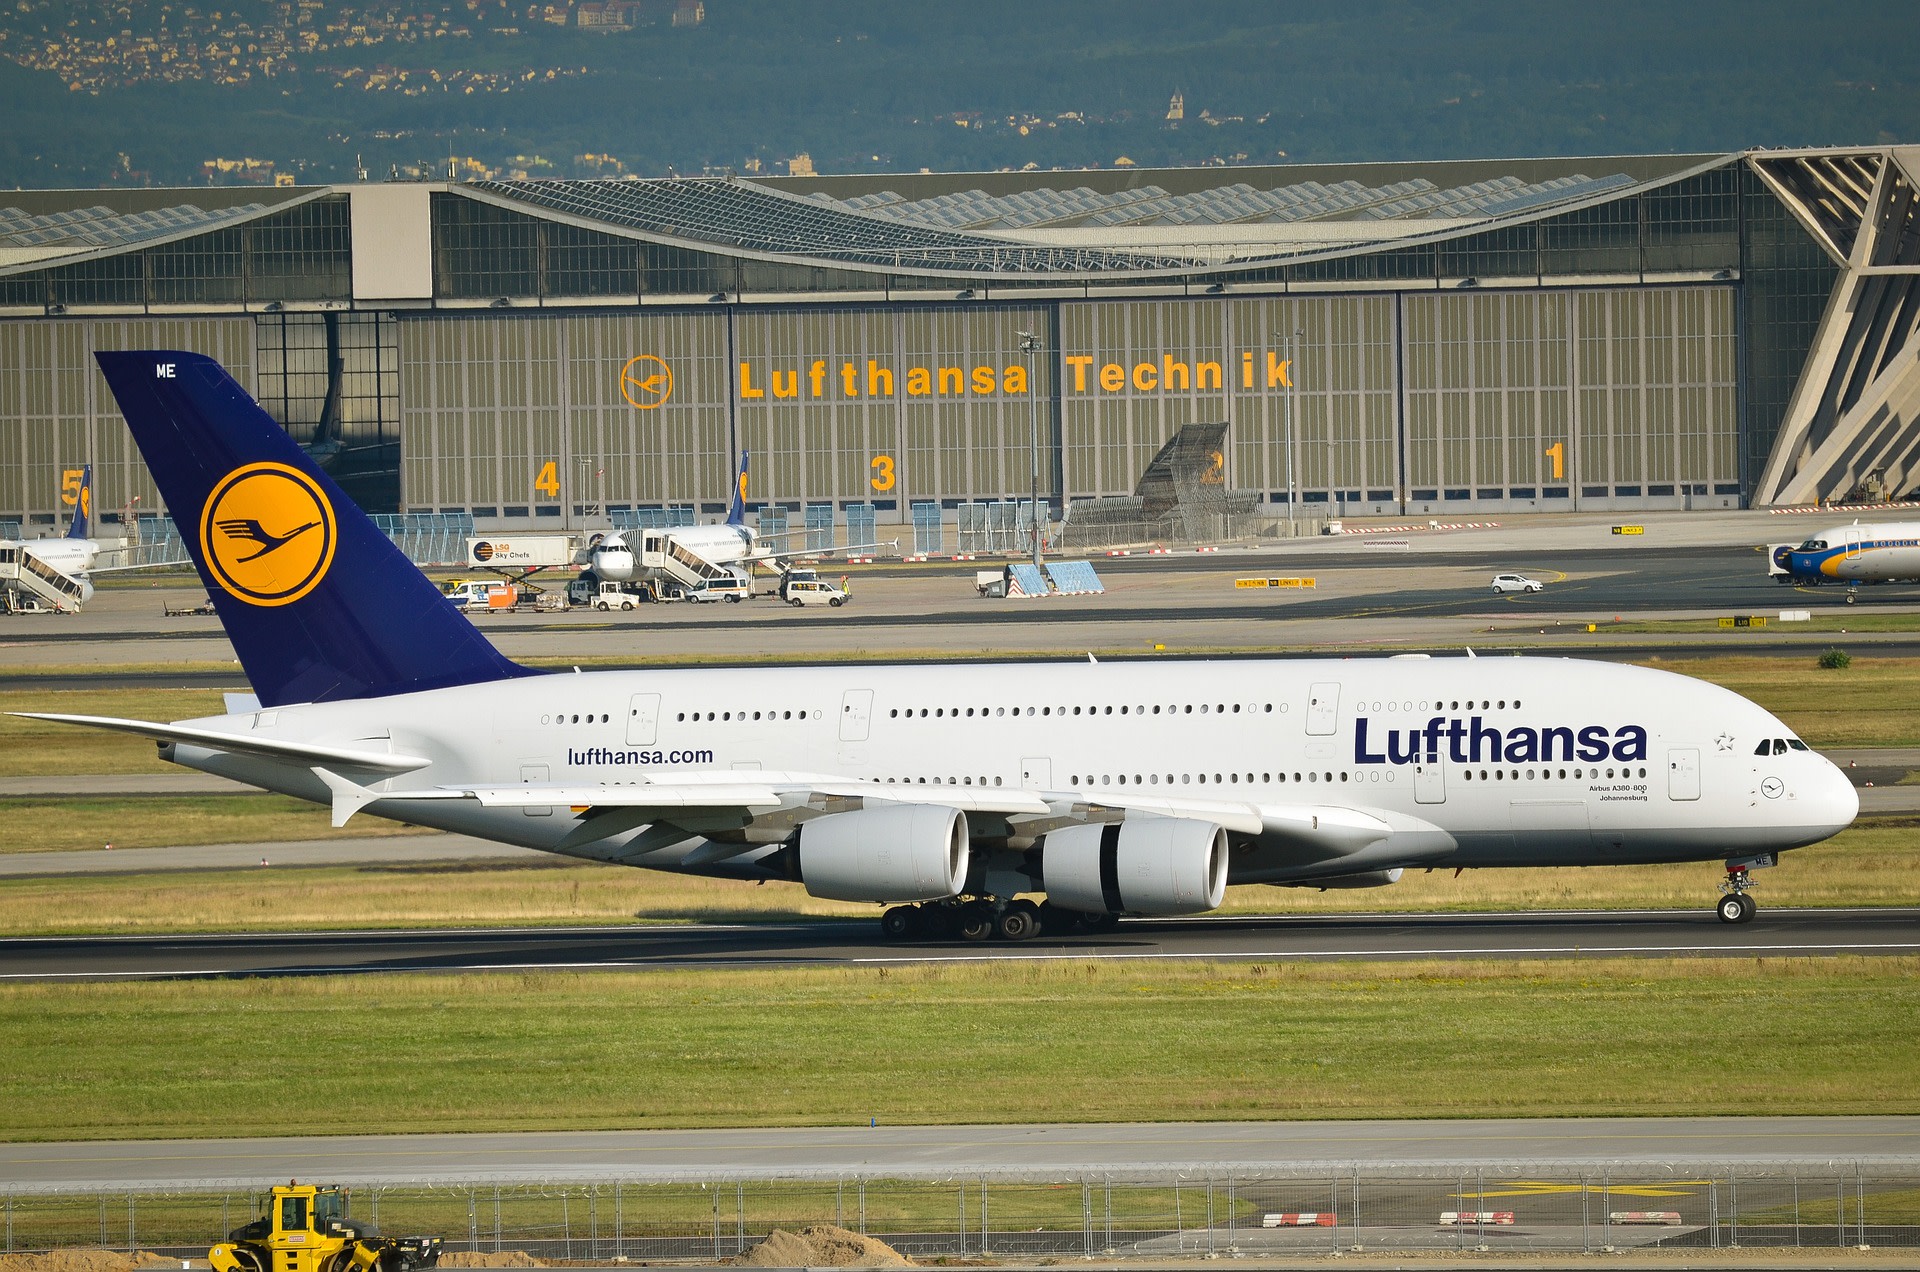 Image of Lufthansa wide-body Airbus A380-800 at airport